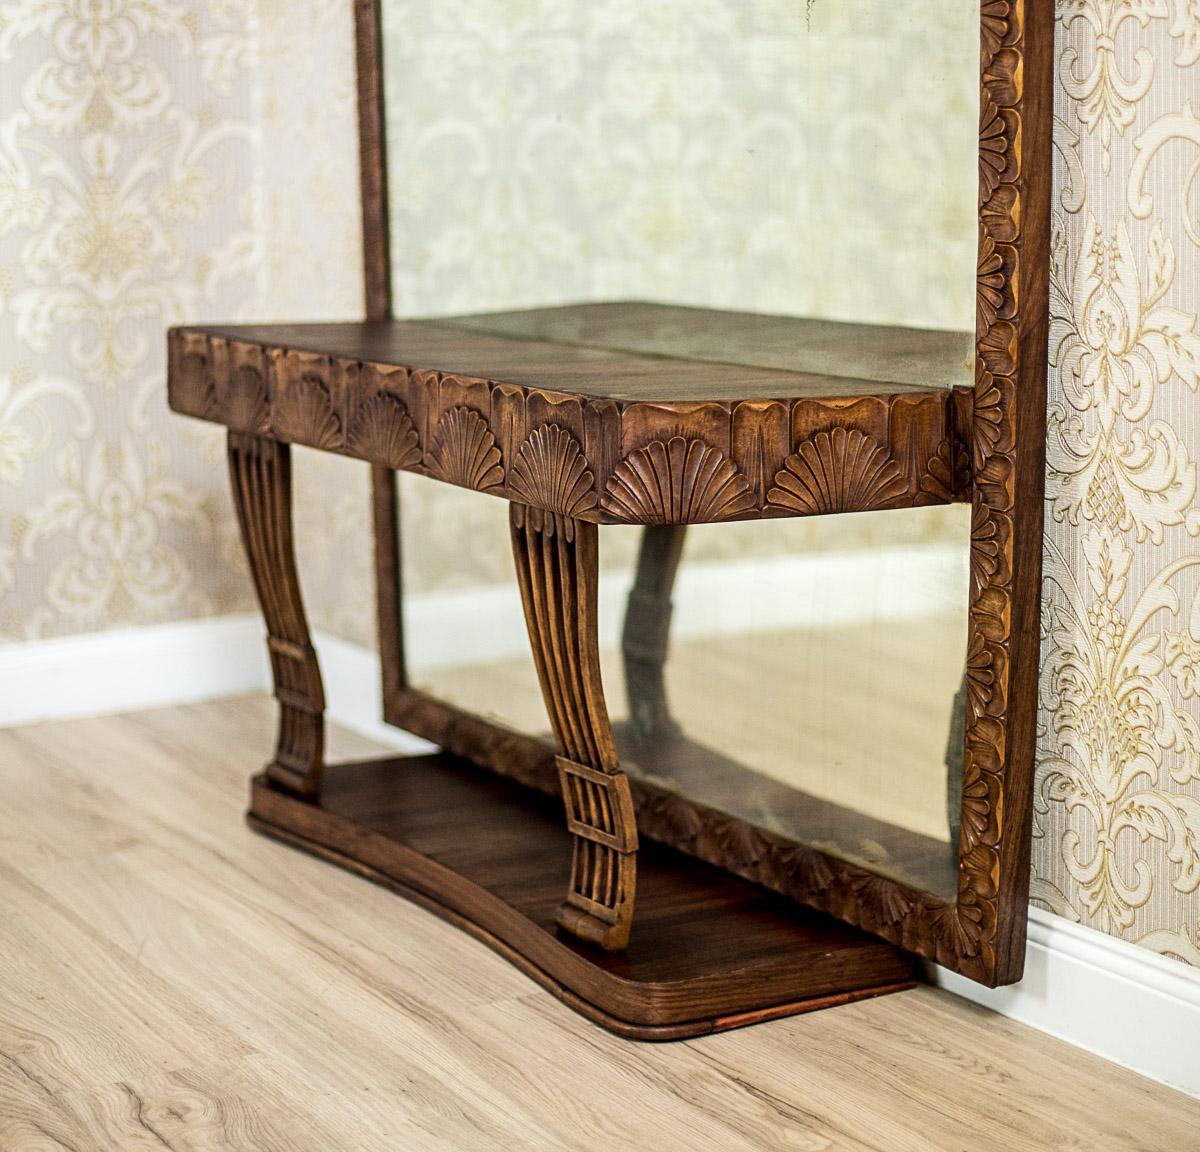 We present you this vanity table composed of a console that adheres to the wall, and a mirror reaching the ground.
The console is supported on legs, which are placed on a pedestal.
Under the top, there are three small drawers hidden in the